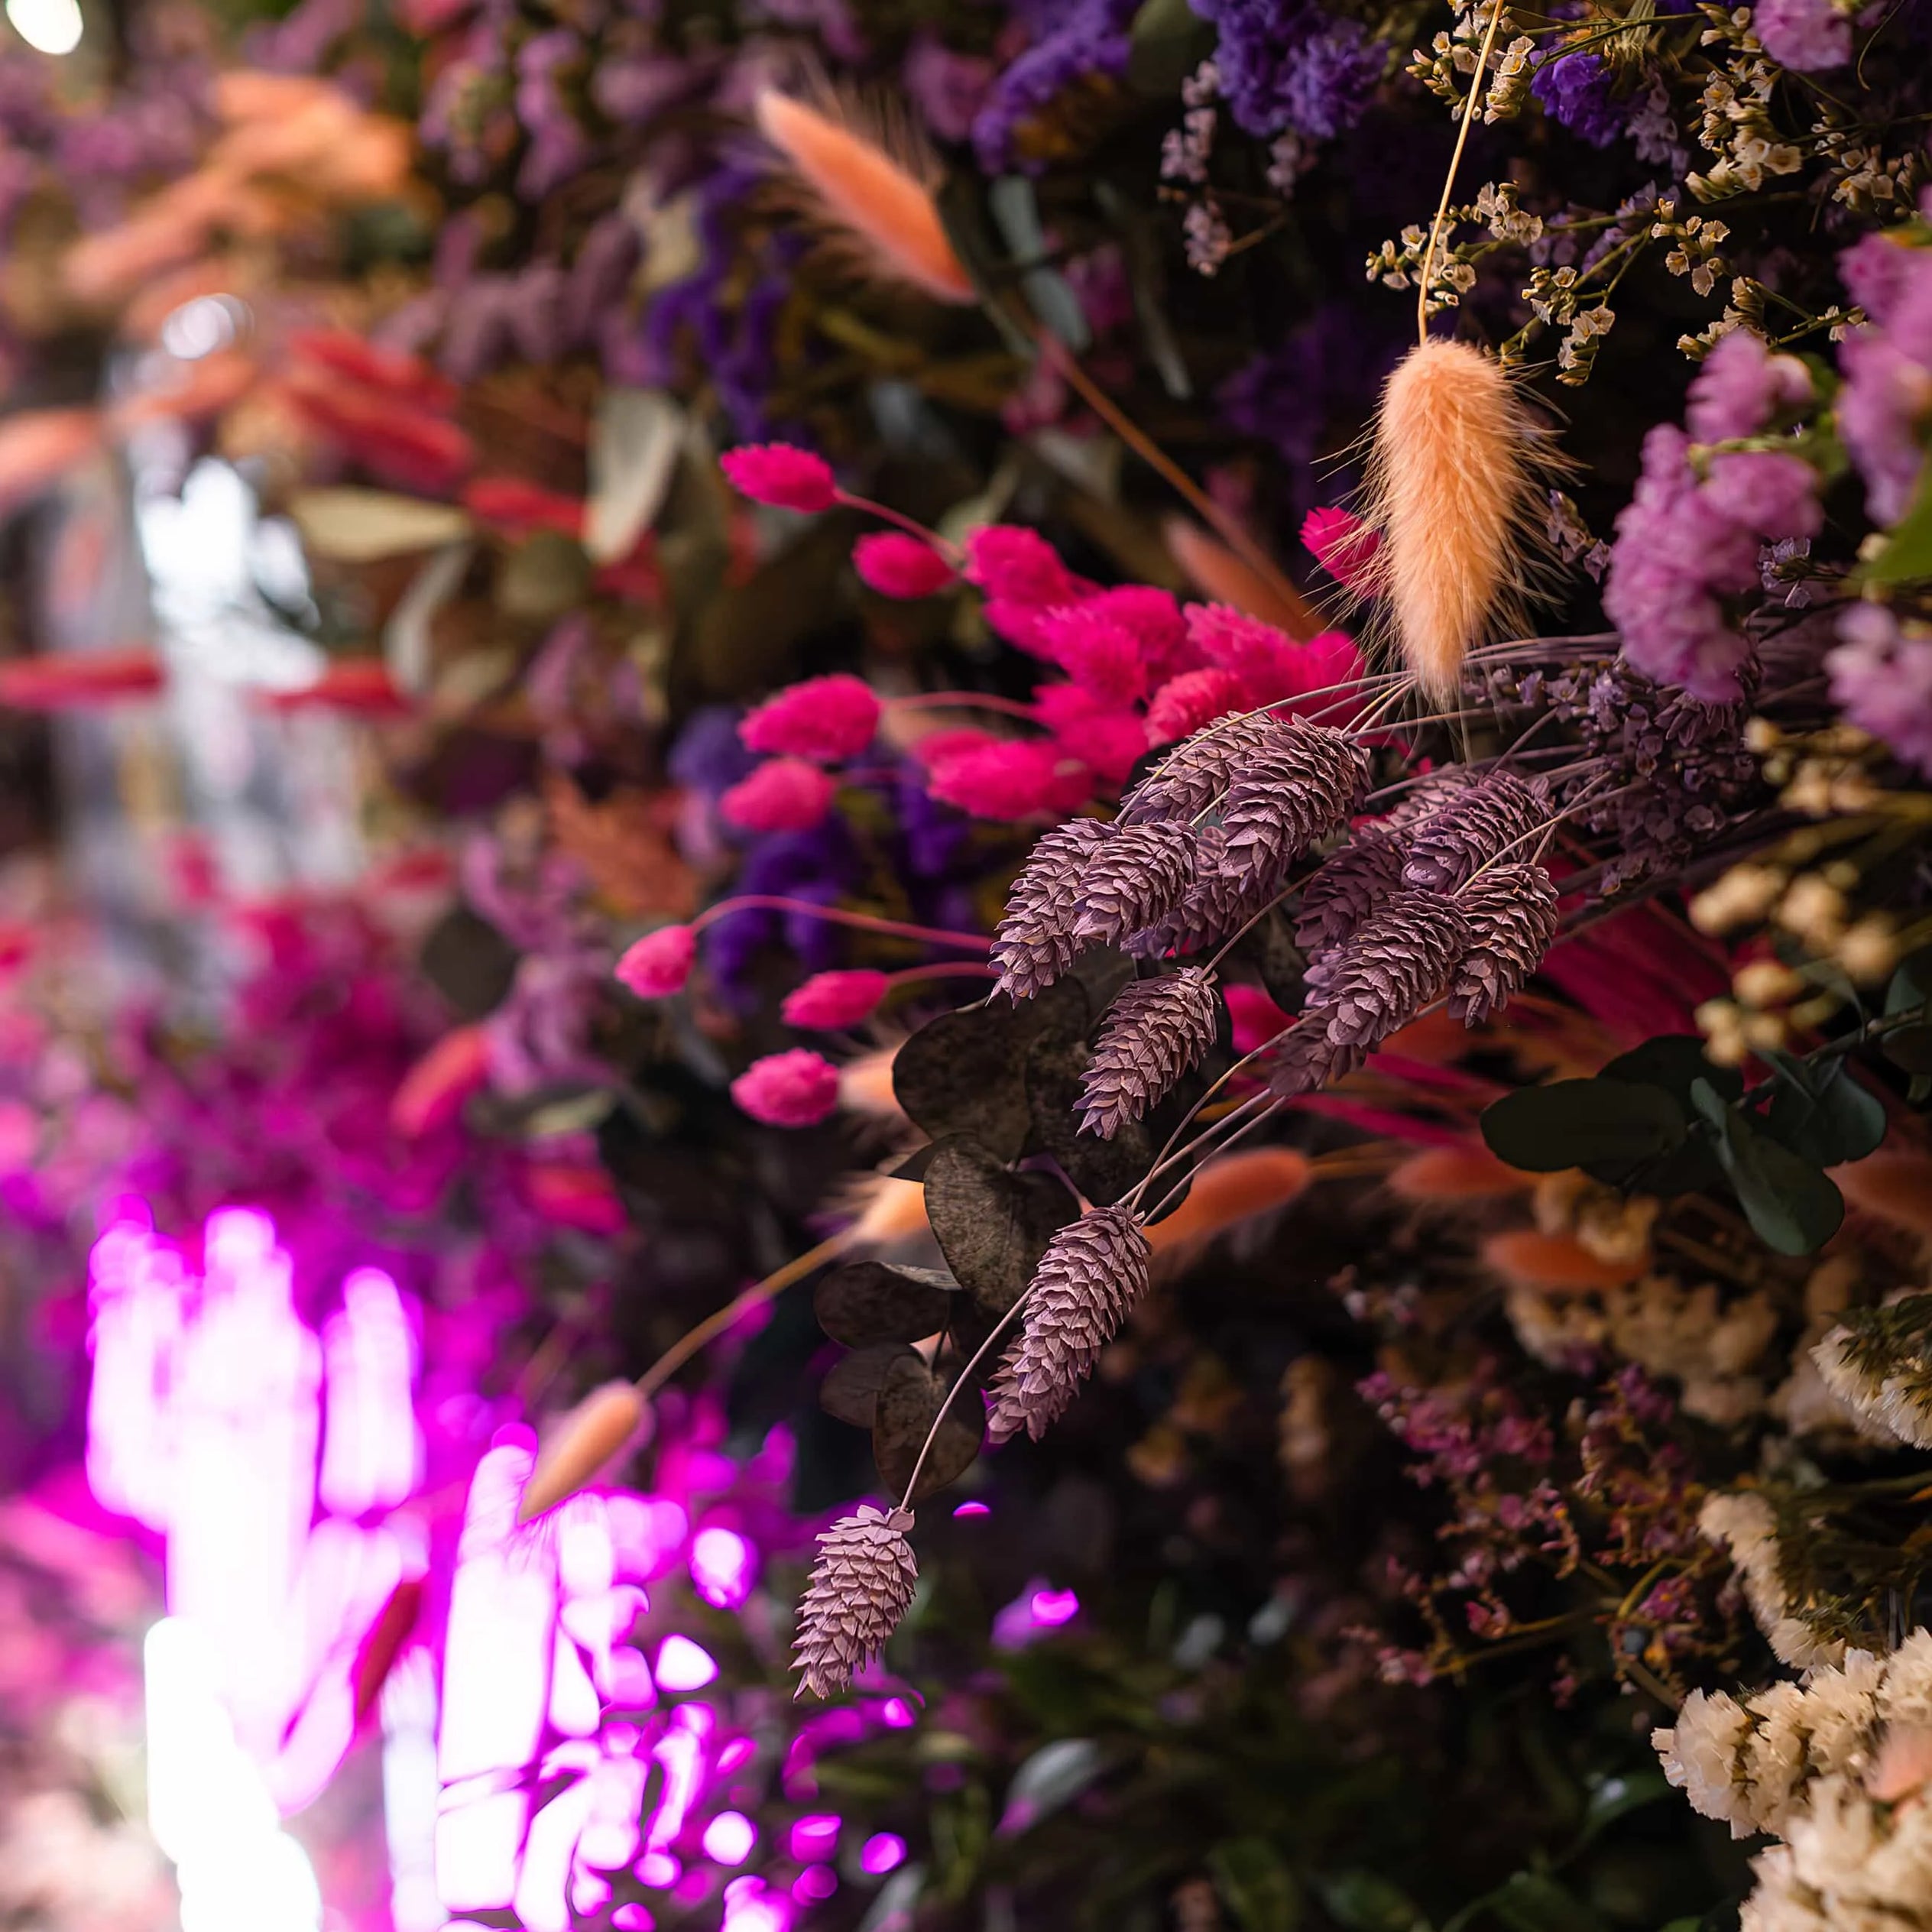 A detailed view of an intricate floral arrangement at the Formula E event, displaying a mix of textured blooms in vivid pinks and purples under ambient lighting - Amaranté London.